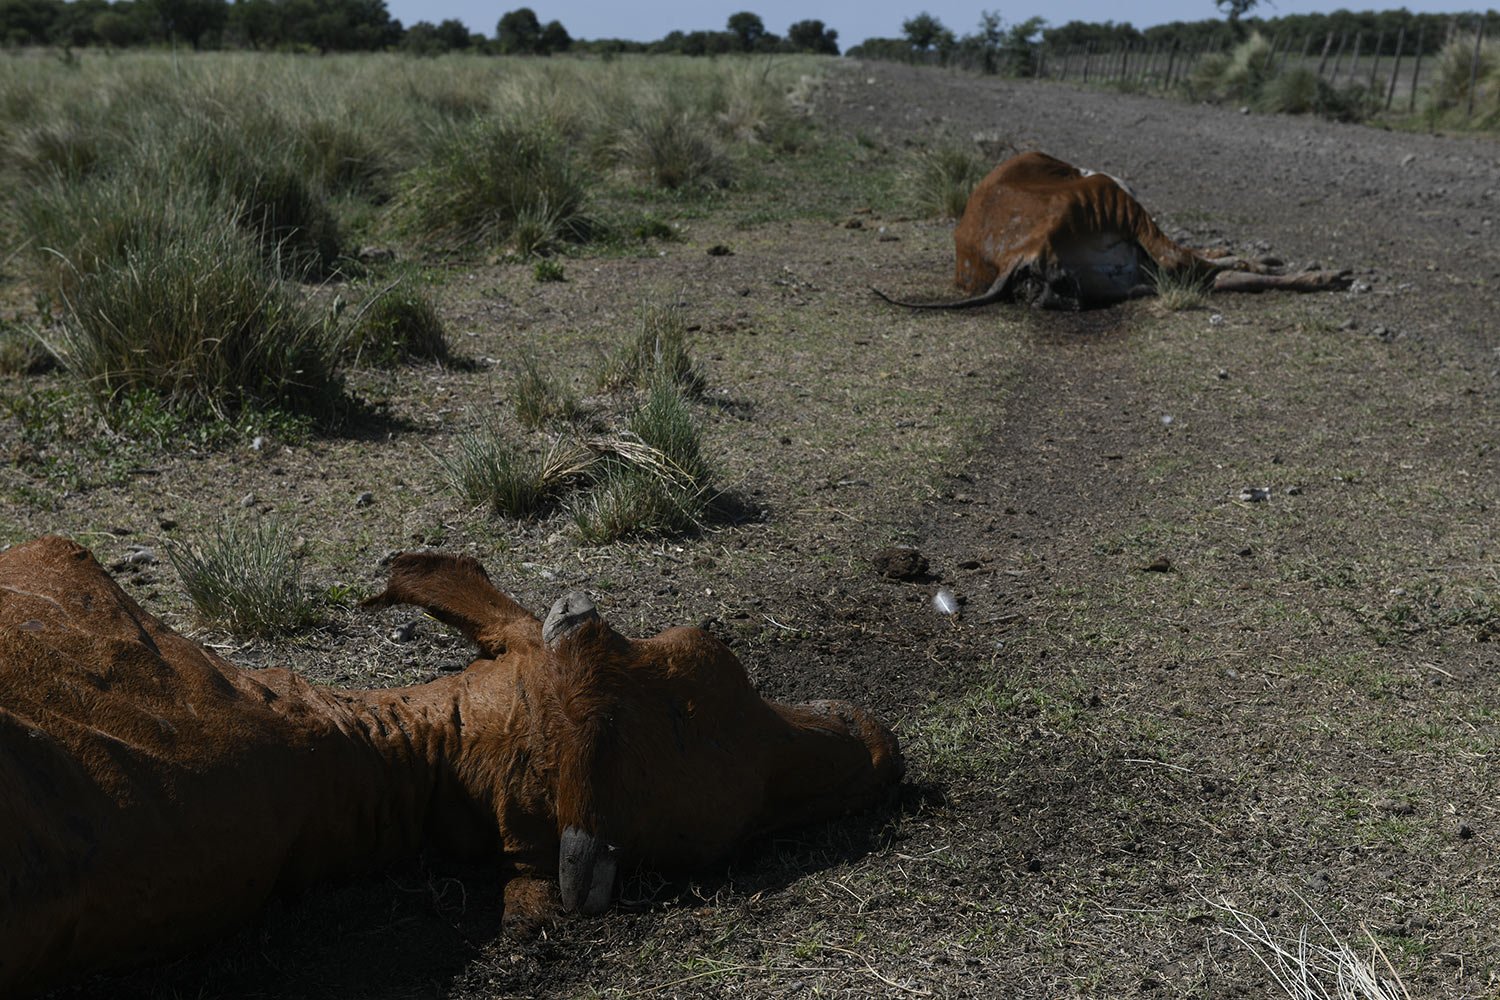  Dead cows lay on the field of farmer Pablo Giailevra, where more than 300 heads of cattle died due to an ongoing drought, in Tostado, Santa Fe province, Argentina, Jan. 18, 2023. Thousands of cattle in the province have died during a prolonged droug